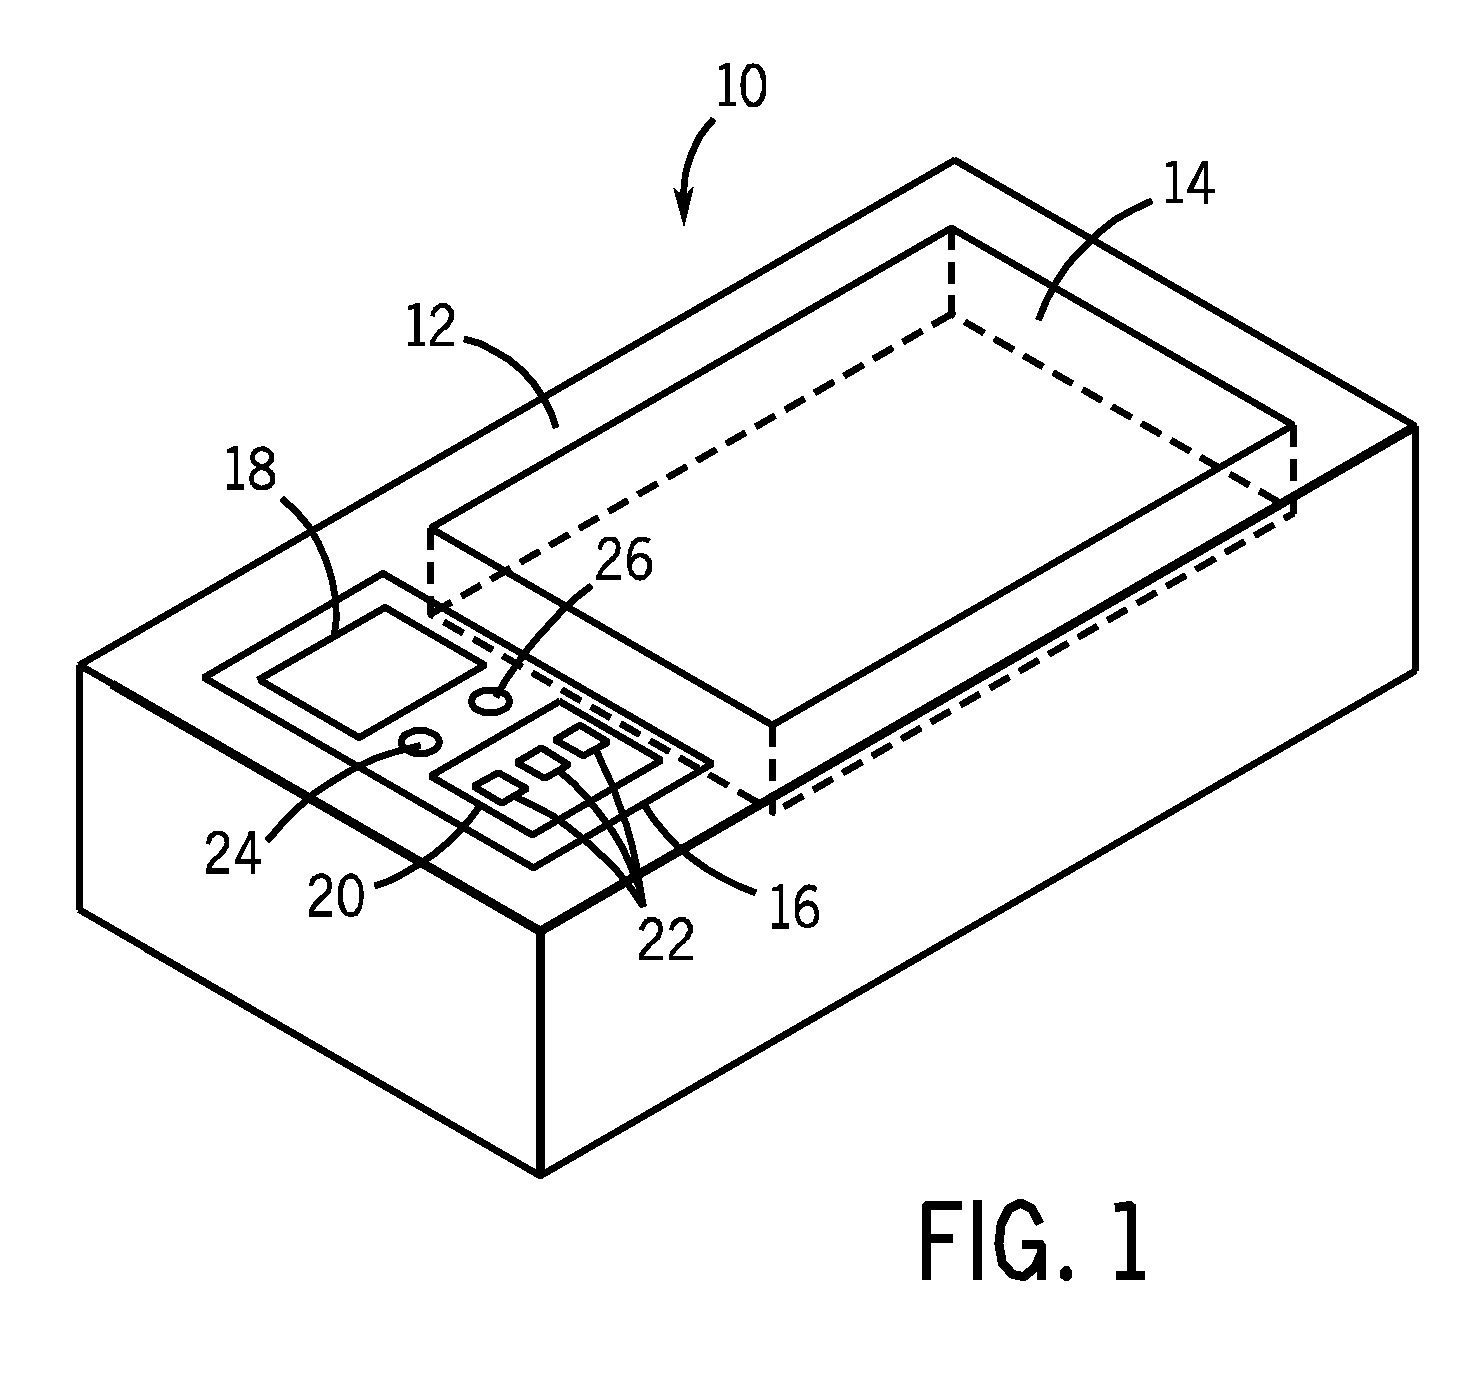 Battery charger using the phase shift by a pair of forward converting circuits